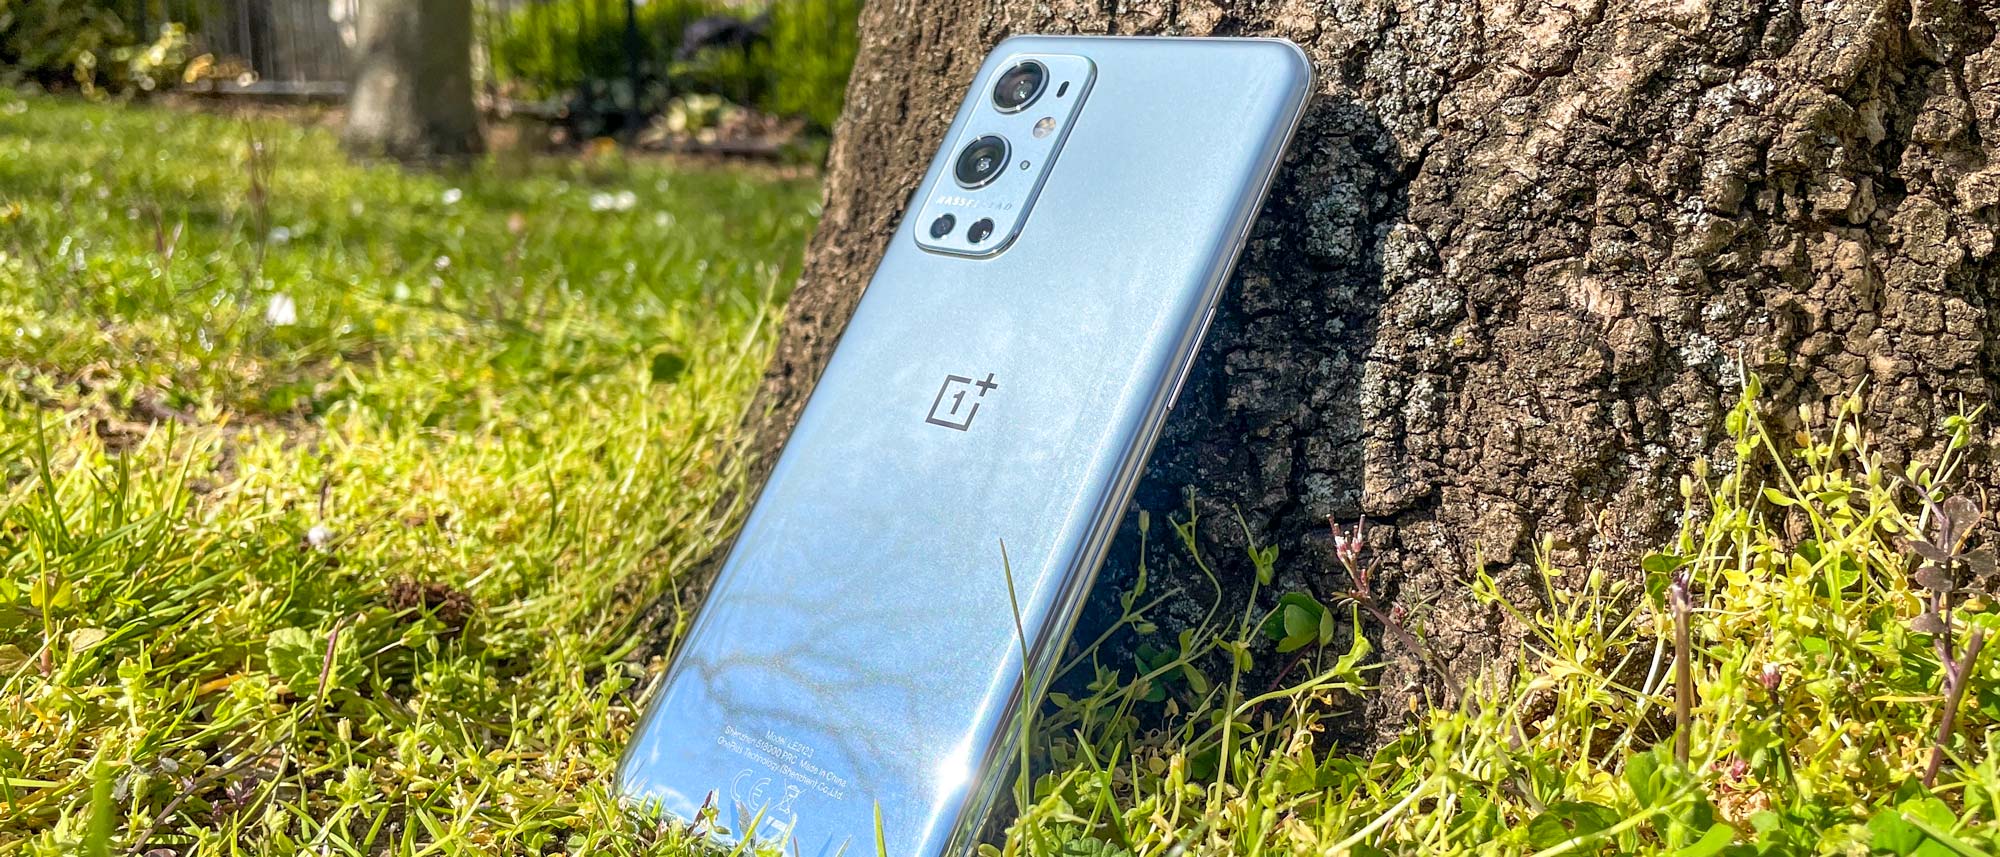 OnePlus 9 Pro in 2022: Why now is a great time to buy